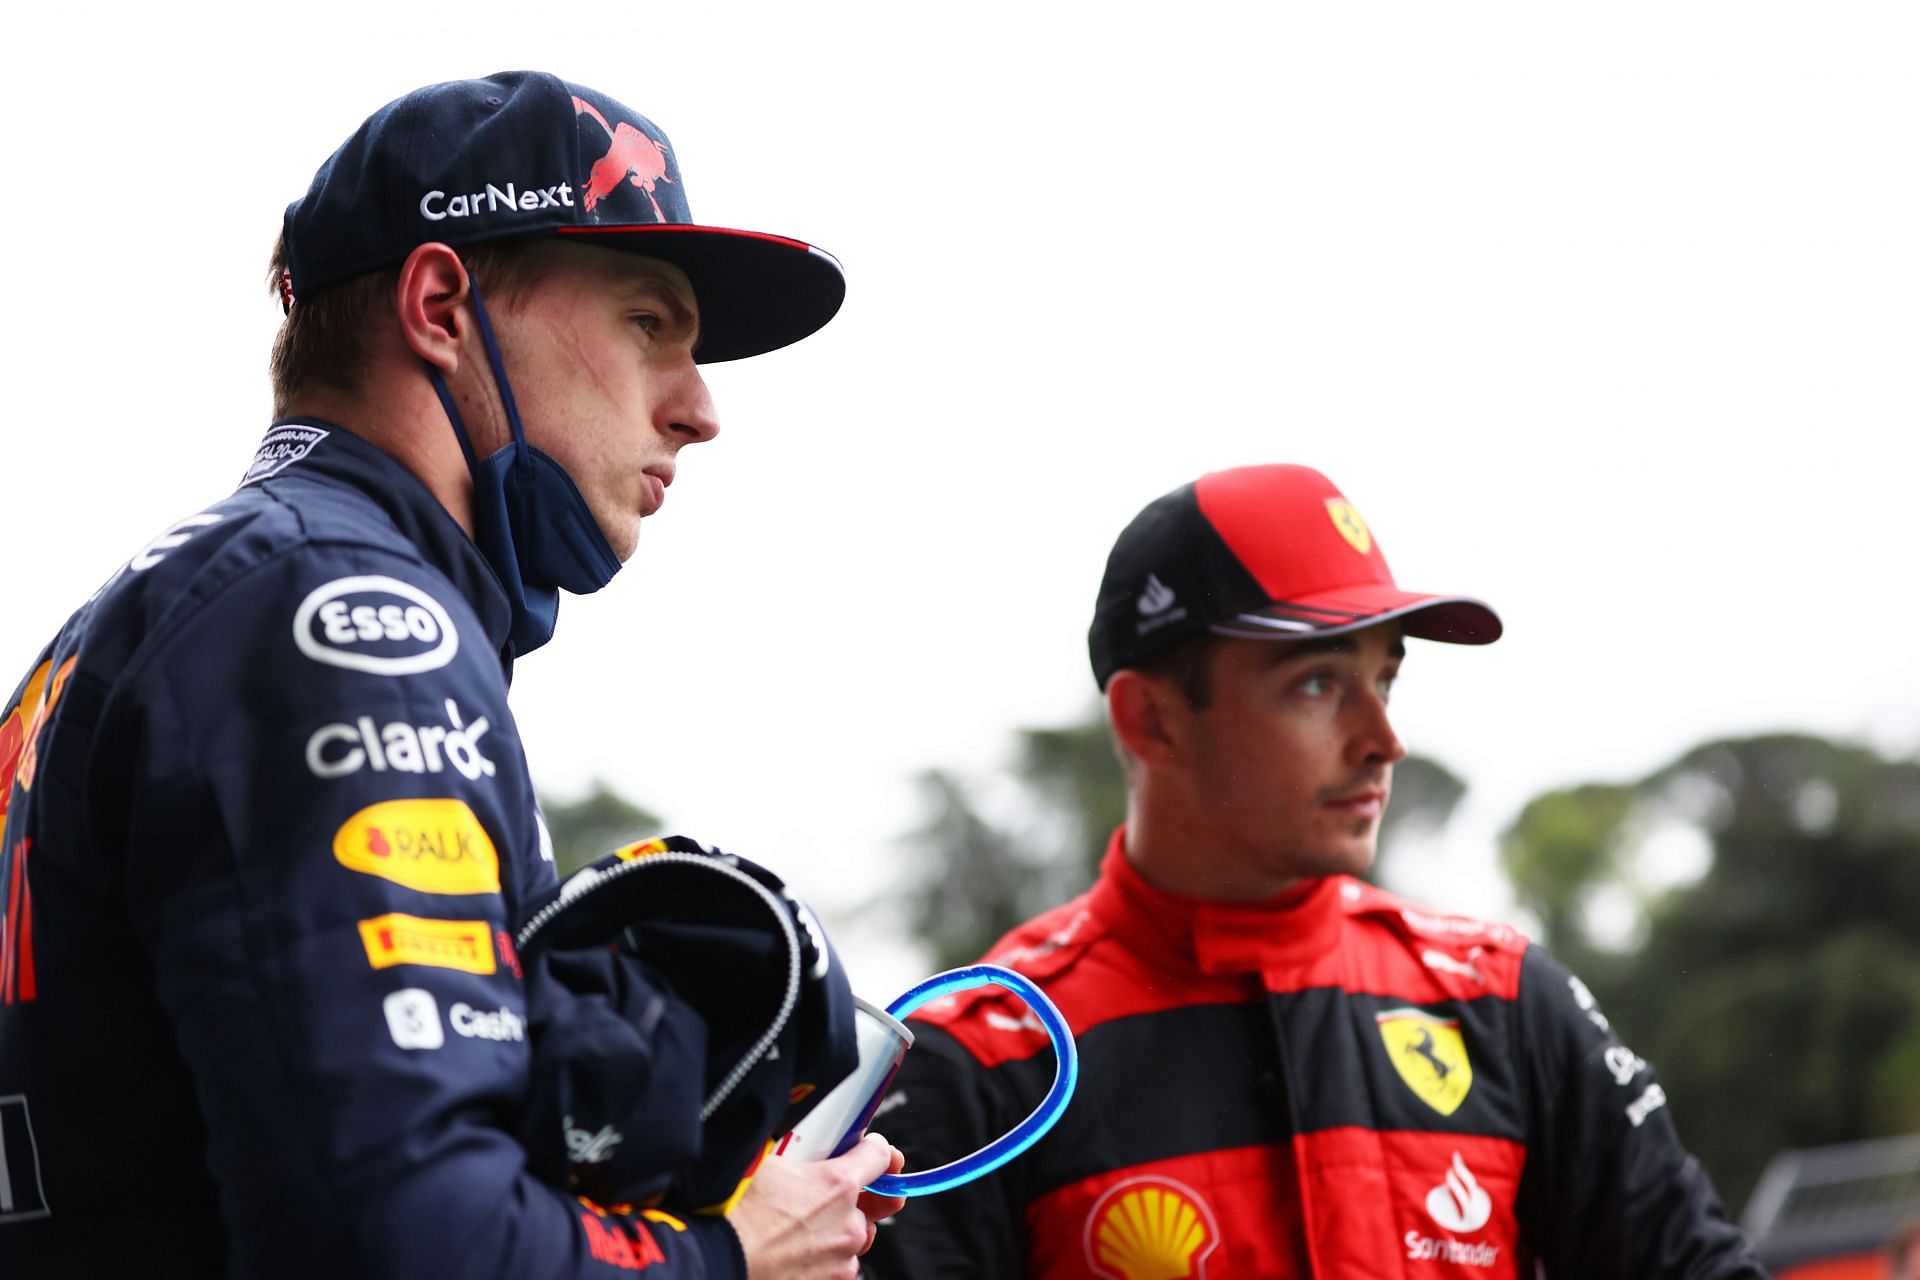 Max Verstappen (left) and Charles Leclerc (right) will renew their battle in the race